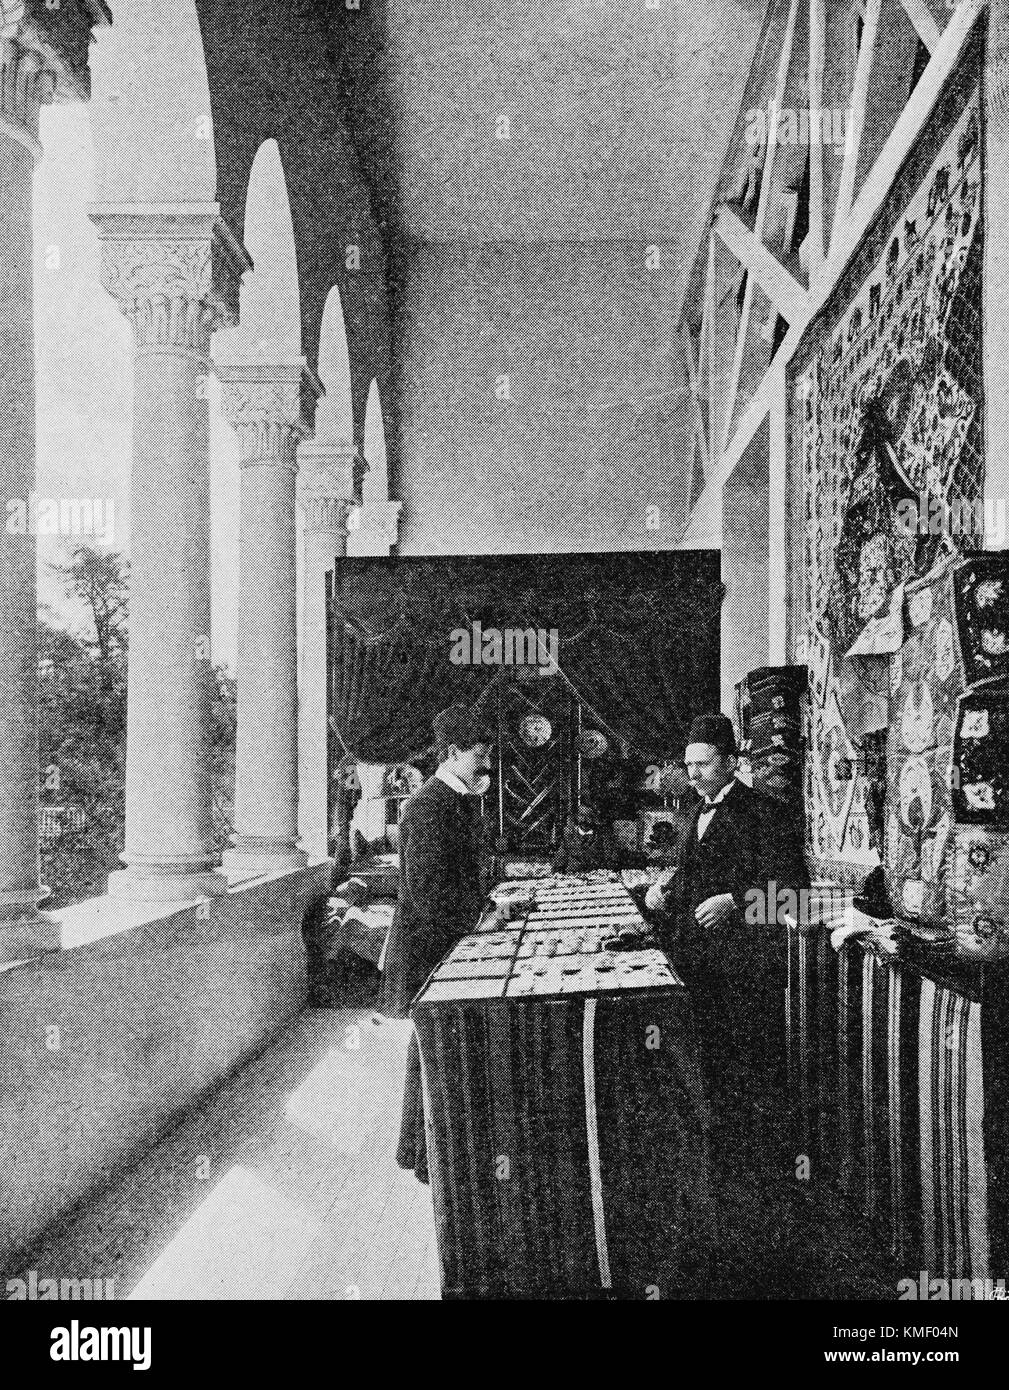 Turkish Pavilion at the Quai d'Orsay, Ottoman Bazar, Universal Exhibition 1900 in Paris, Picture from the French weekly newspaper l'Illustration, 11th August 1900 Stock Photo